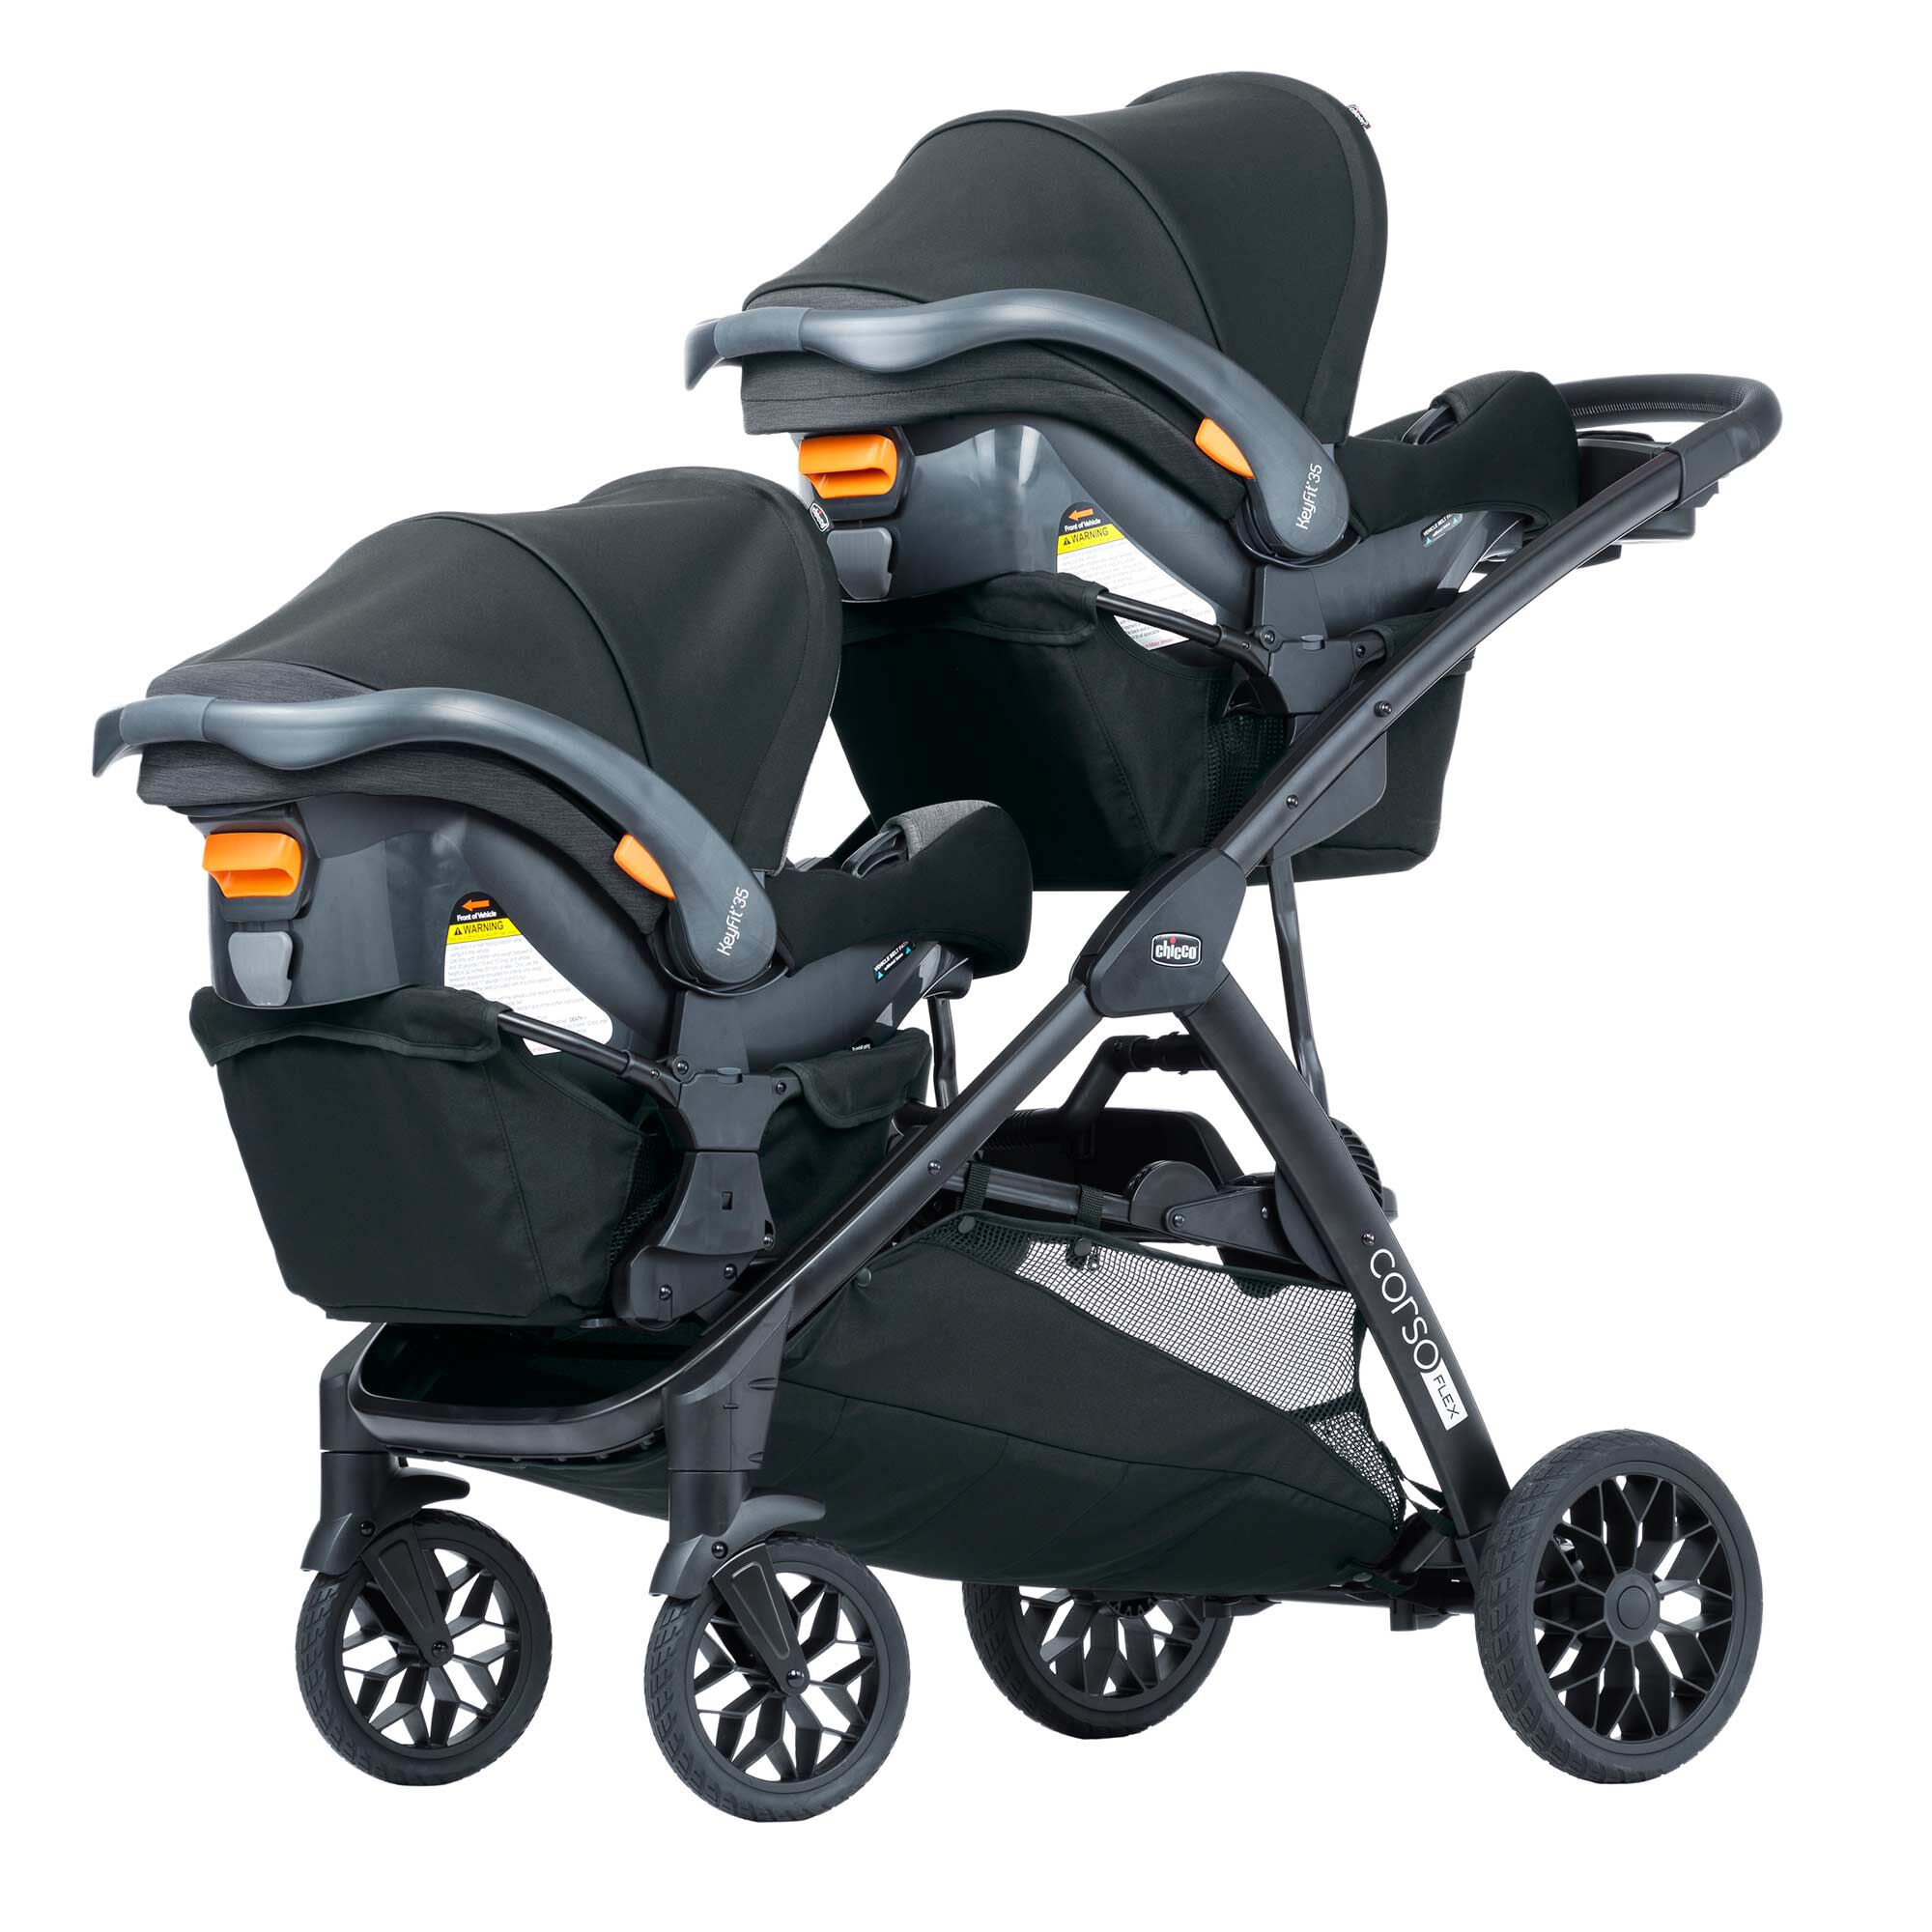 Chicco Baby Products  Car Seats, Strollers, Highchairs & More